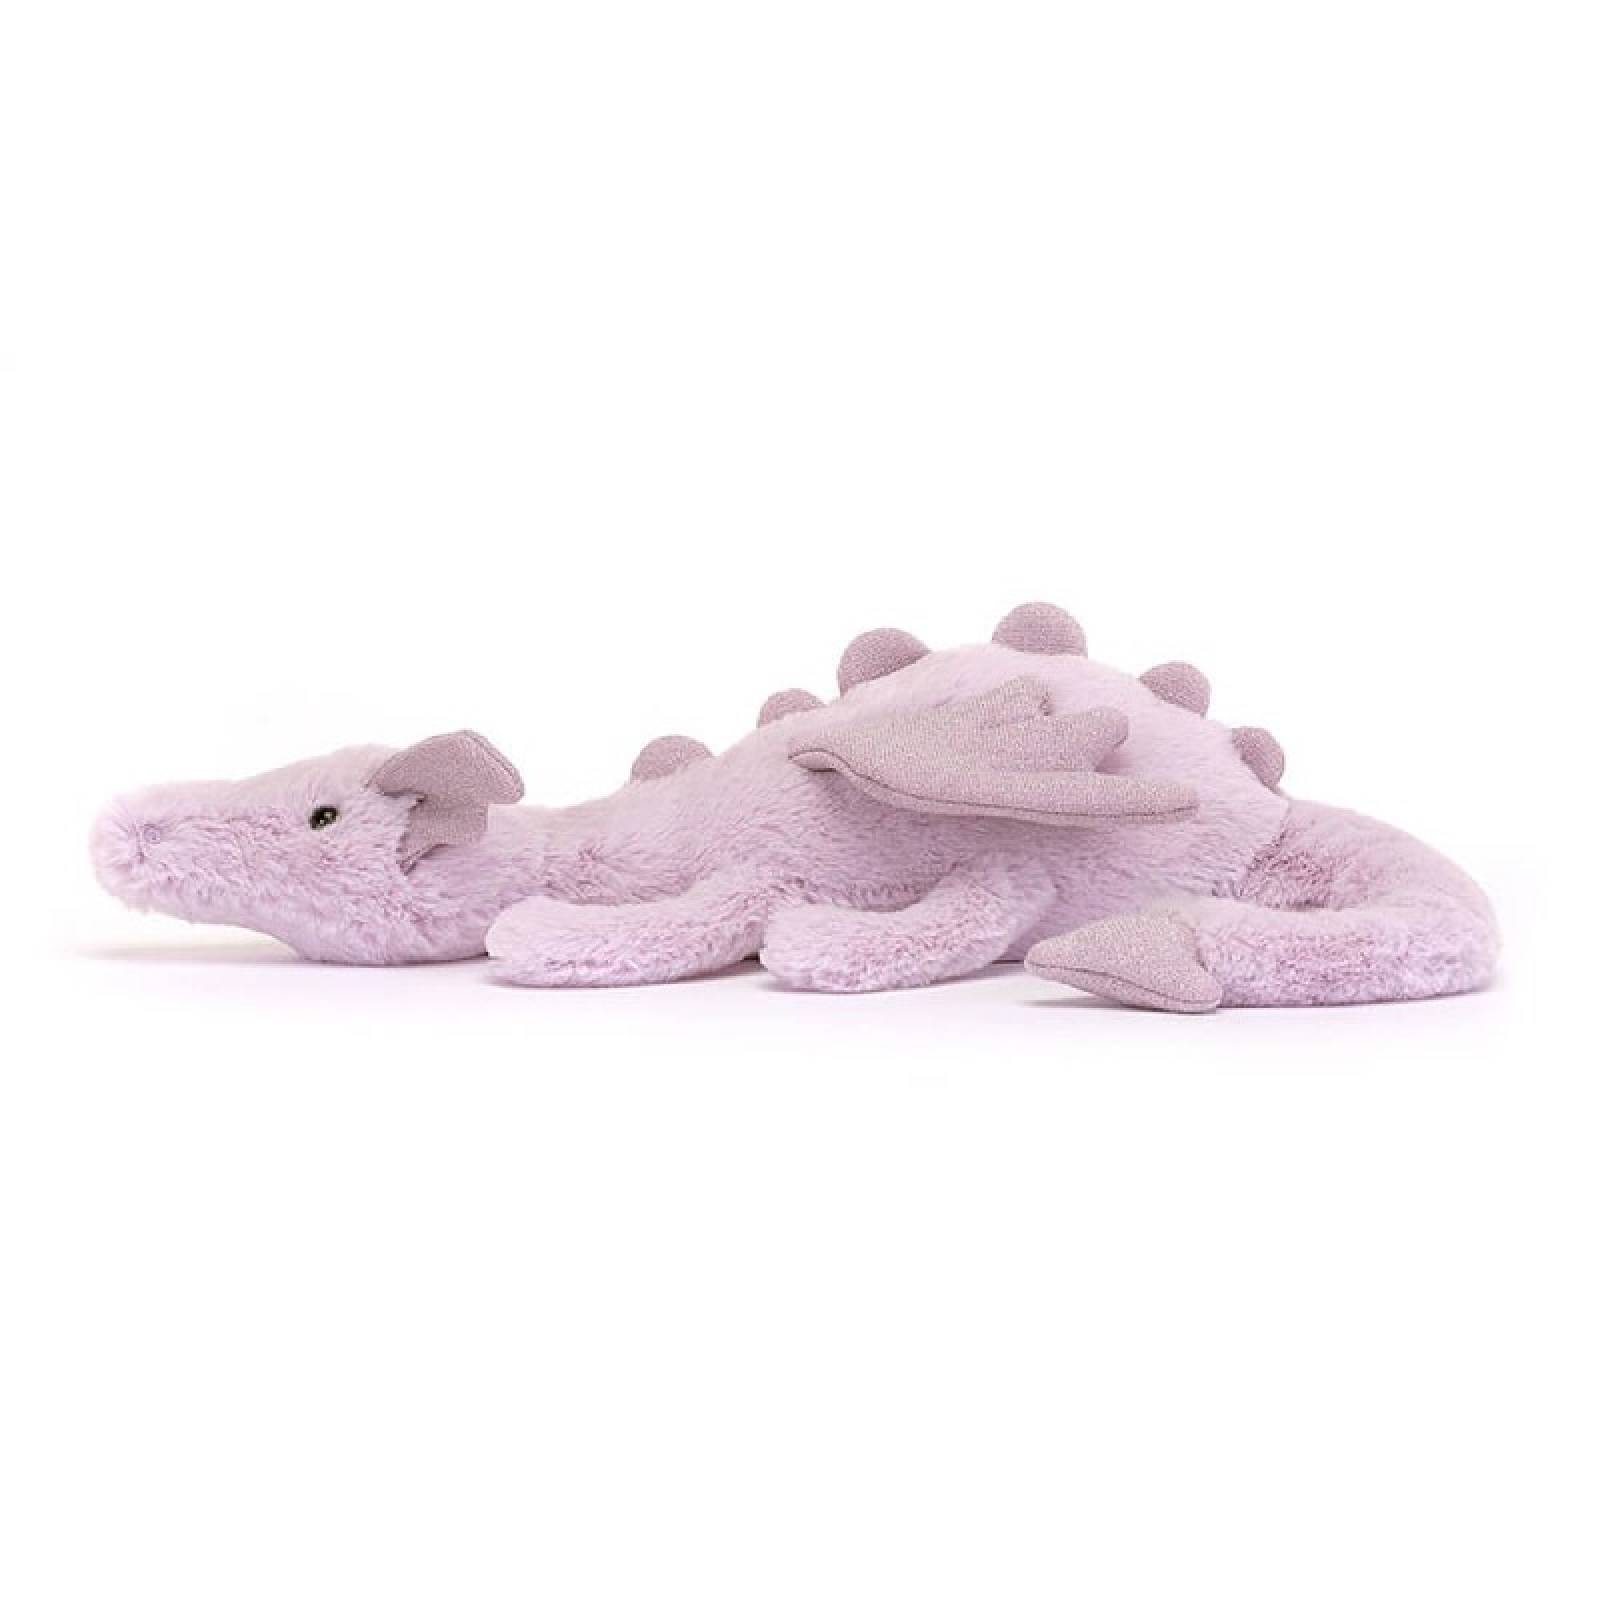 Little Lavender Dragon Soft Toy By Jellycat 0+ thumbnails